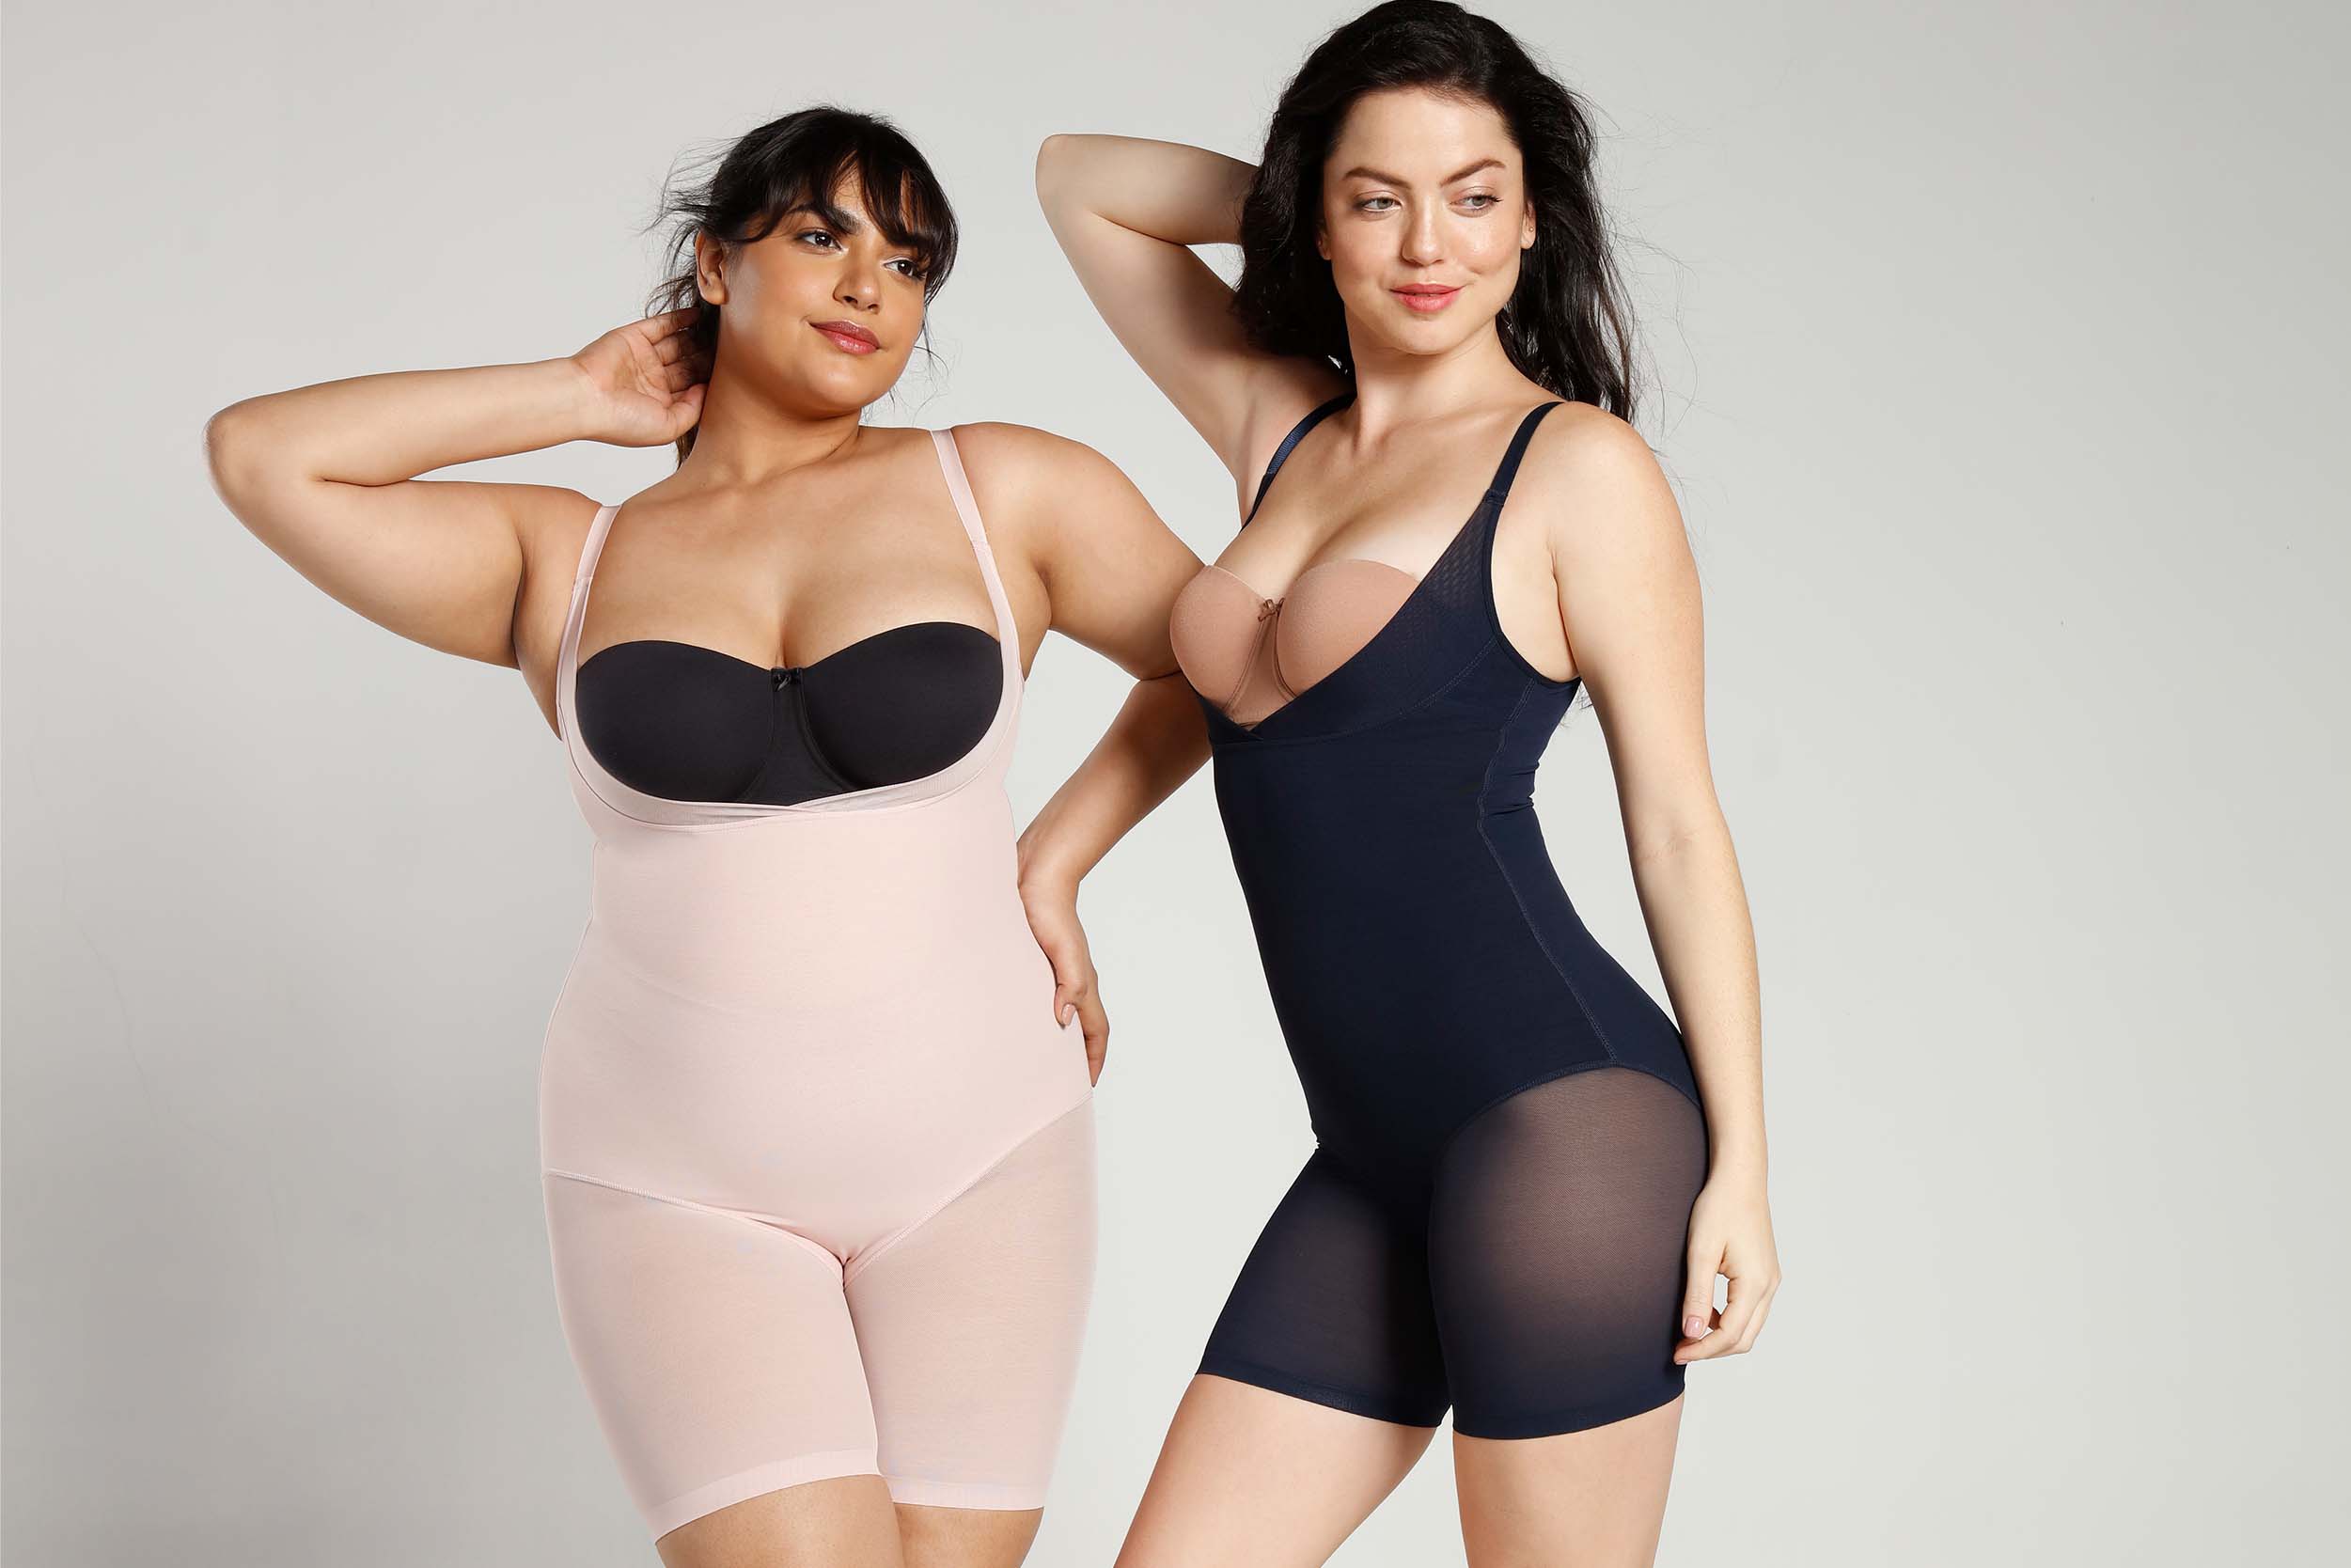 The Wonders of Wearing Shapewear - ahead of the curve